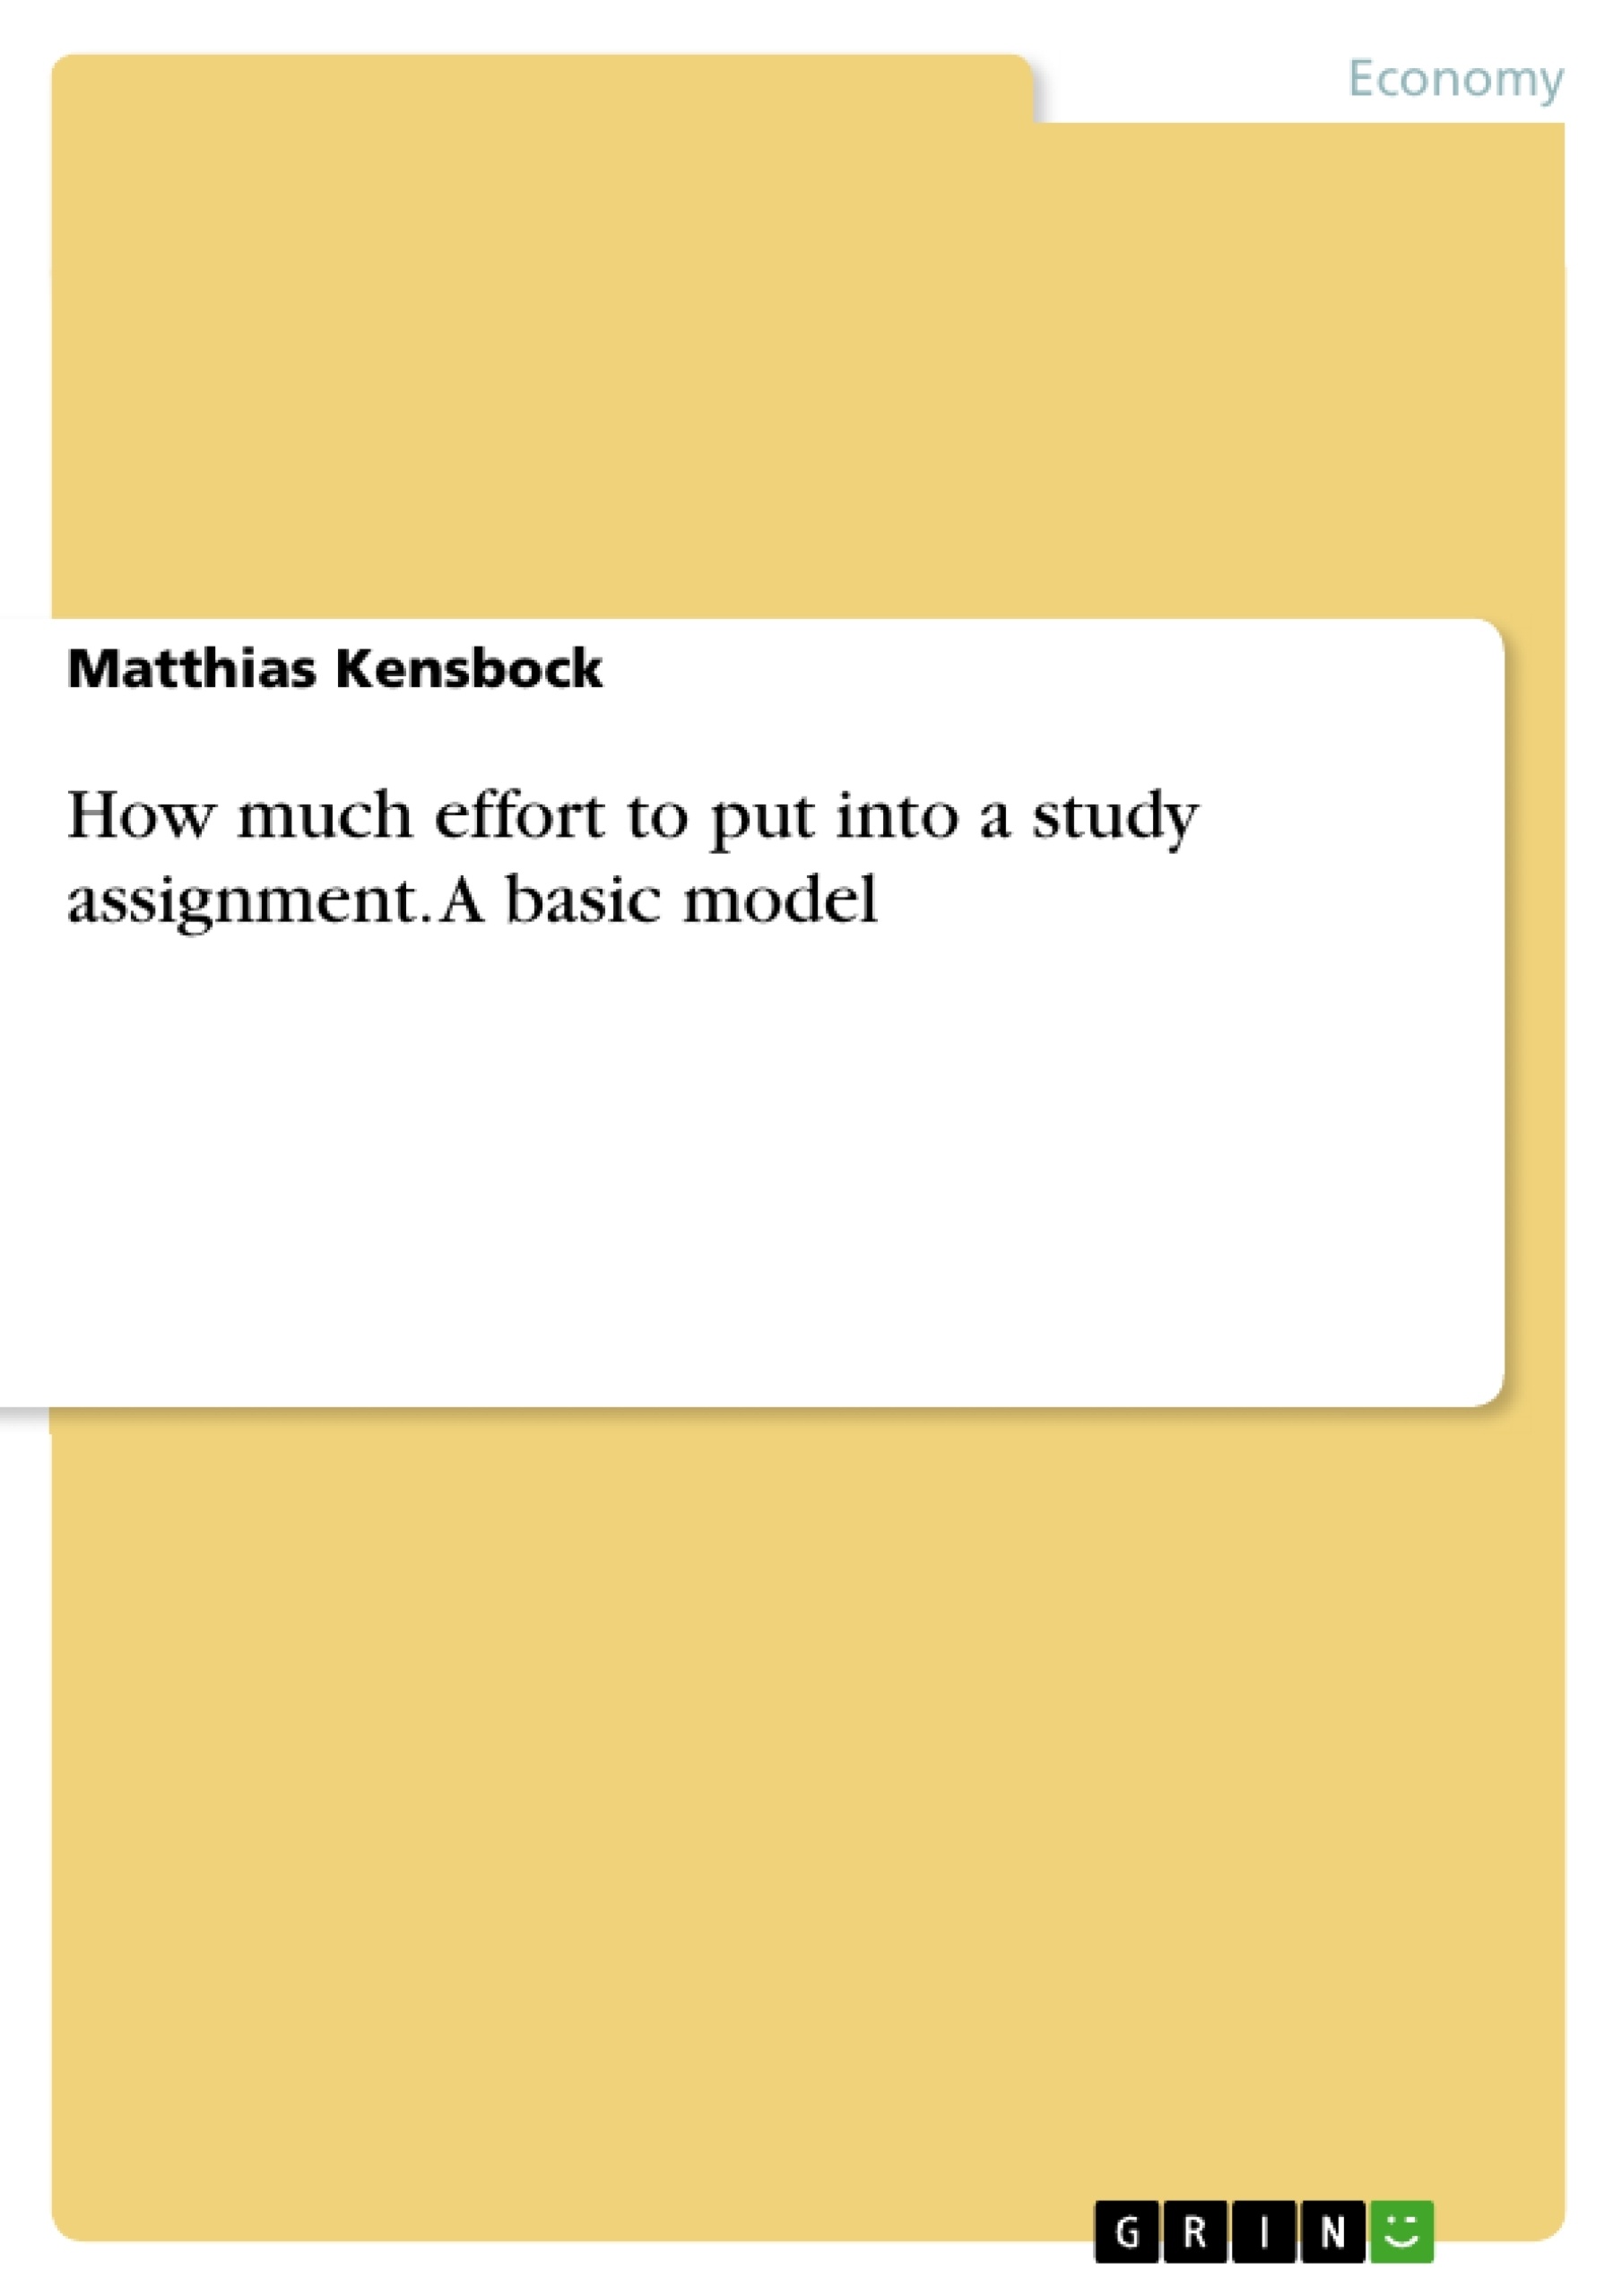 Titel: How much effort to put into a study assignment.
A basic model